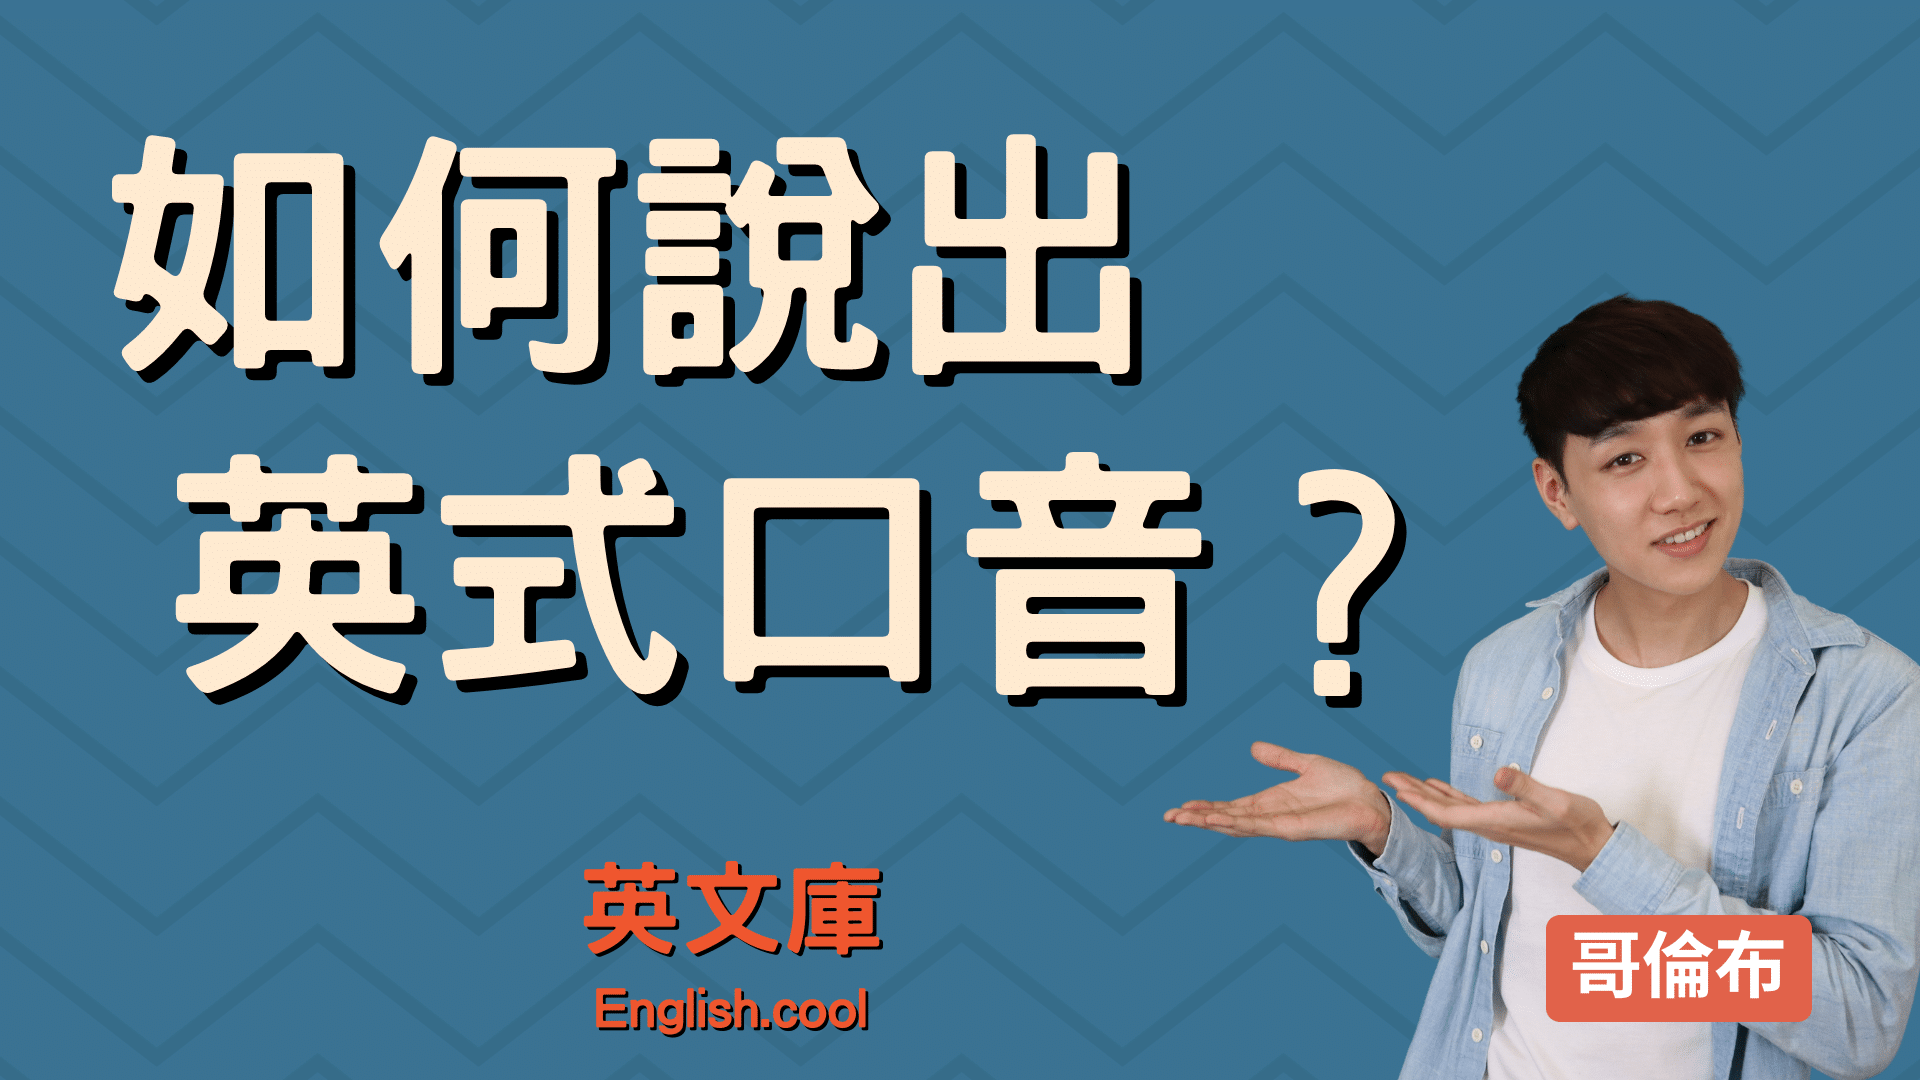 You are currently viewing 【哥倫布發音庫】如何說出英式發音？詳細英國口音分析！